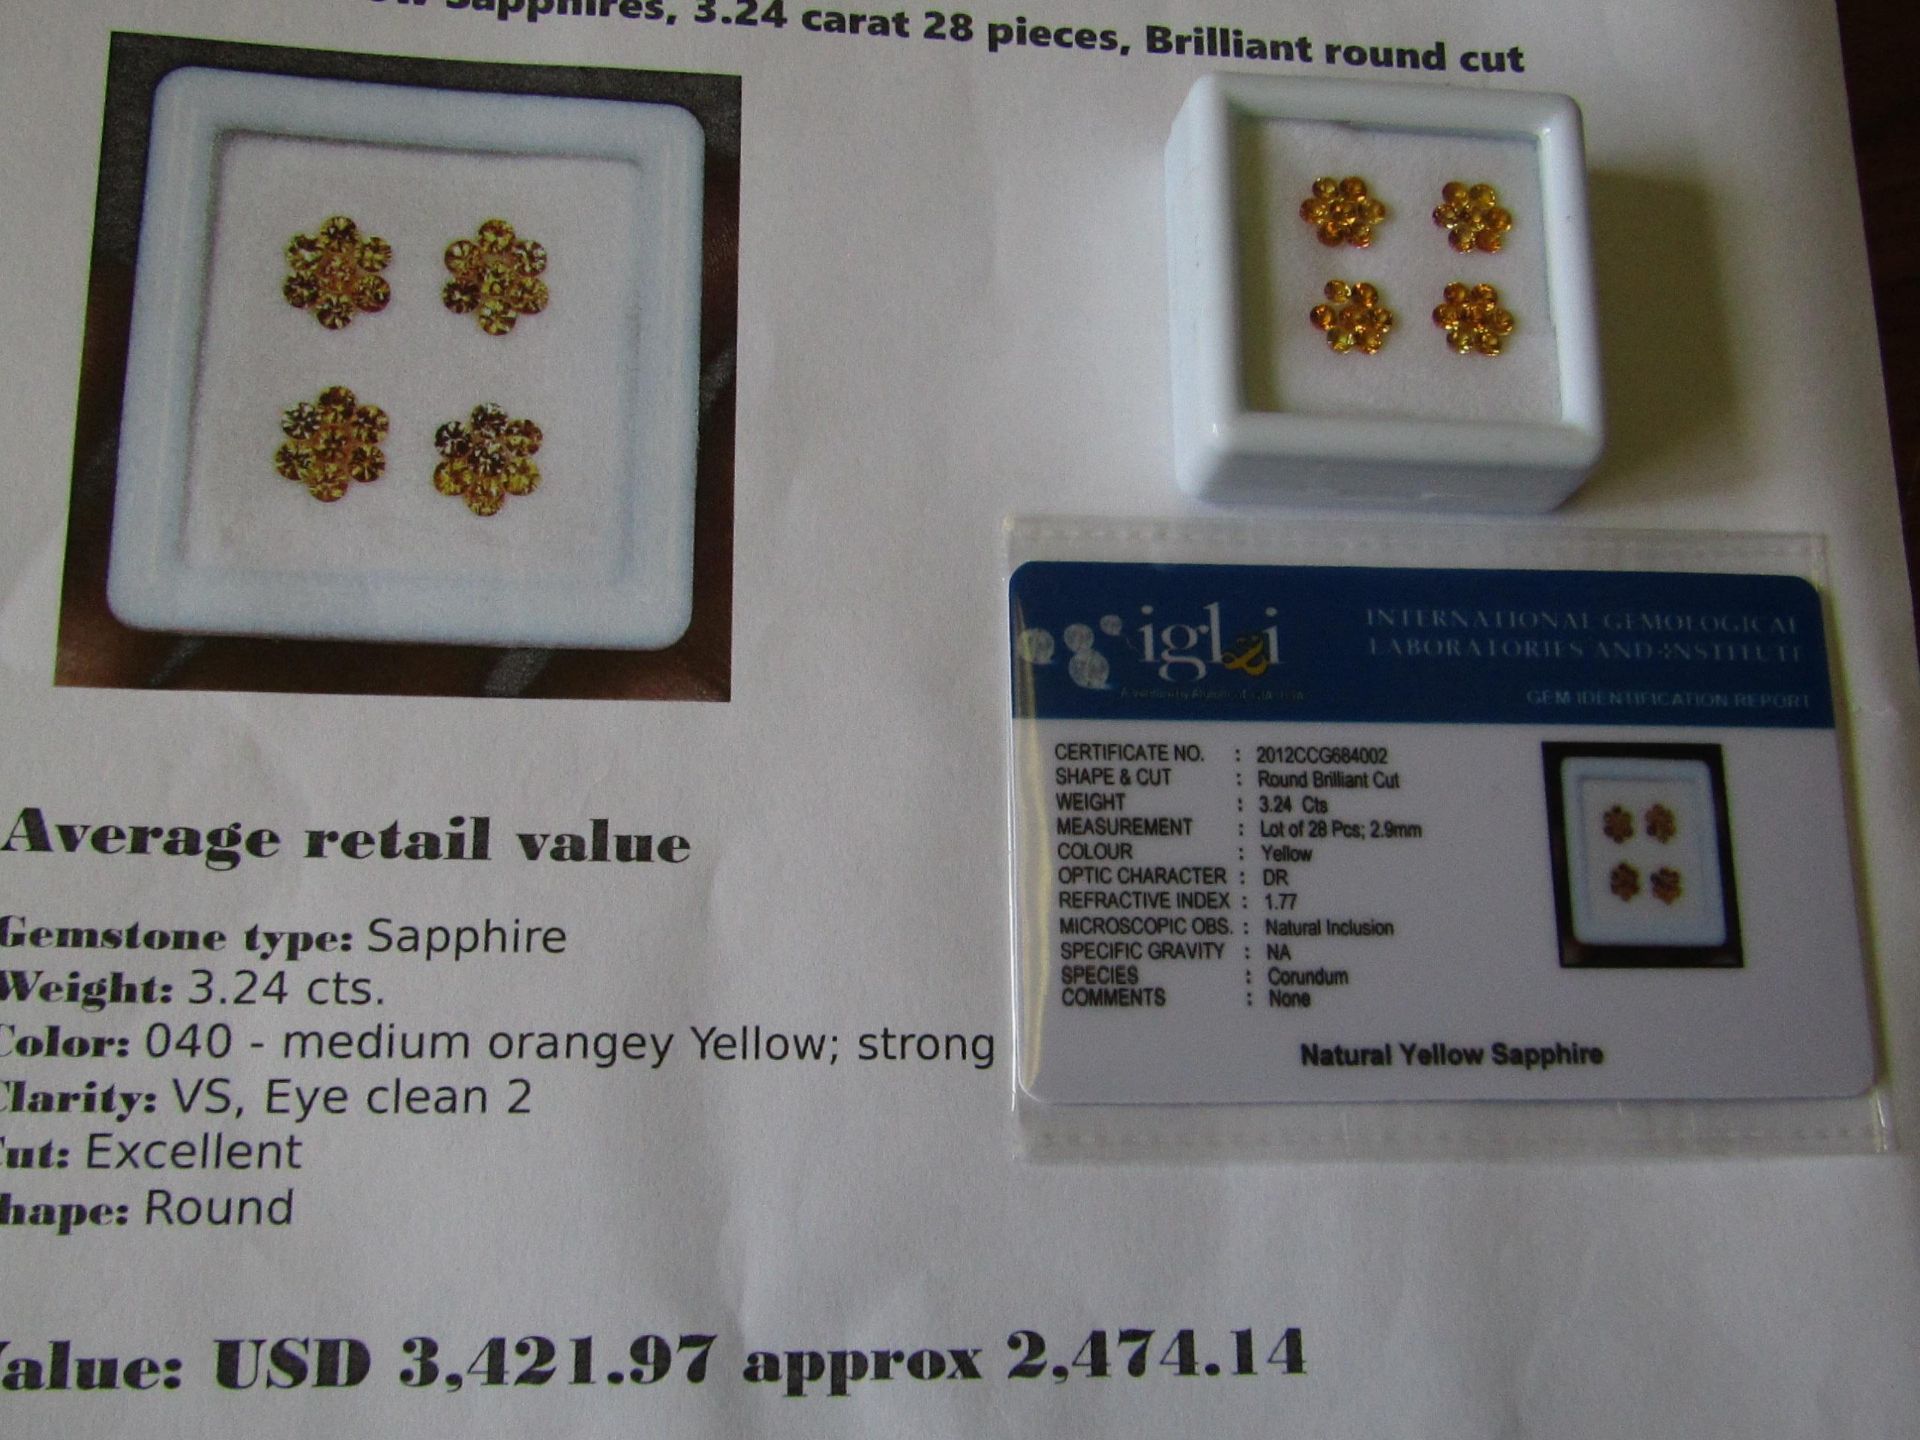 IGL&I certified - Natural Yellow Sapphires (unheated) - 3.24 carats - 28 pieces - average retail